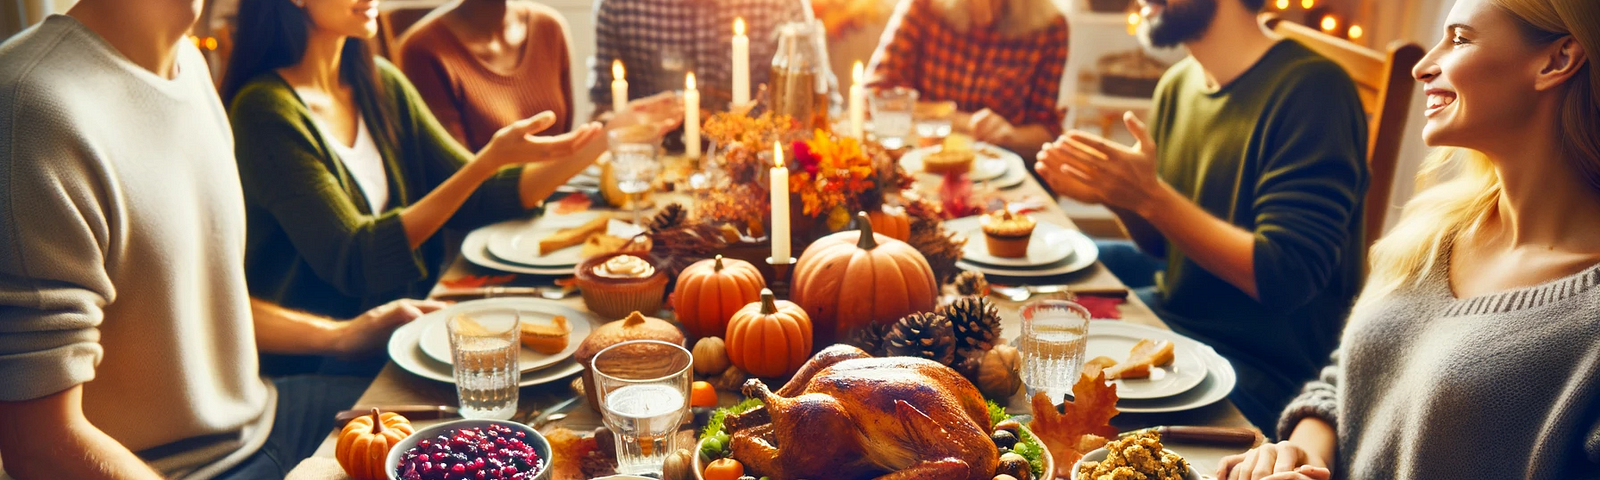 A festive Thanksgiving dinner table with an array of traditional dishes like turkey, stuffing, cranberry sauce, and pumpkin pie, featuring a diverse group of people engaging in lively conversation. The setting is warm and inviting, with soft lighting and autumnal decorations, capturing a sense of family, unity, and celebration.